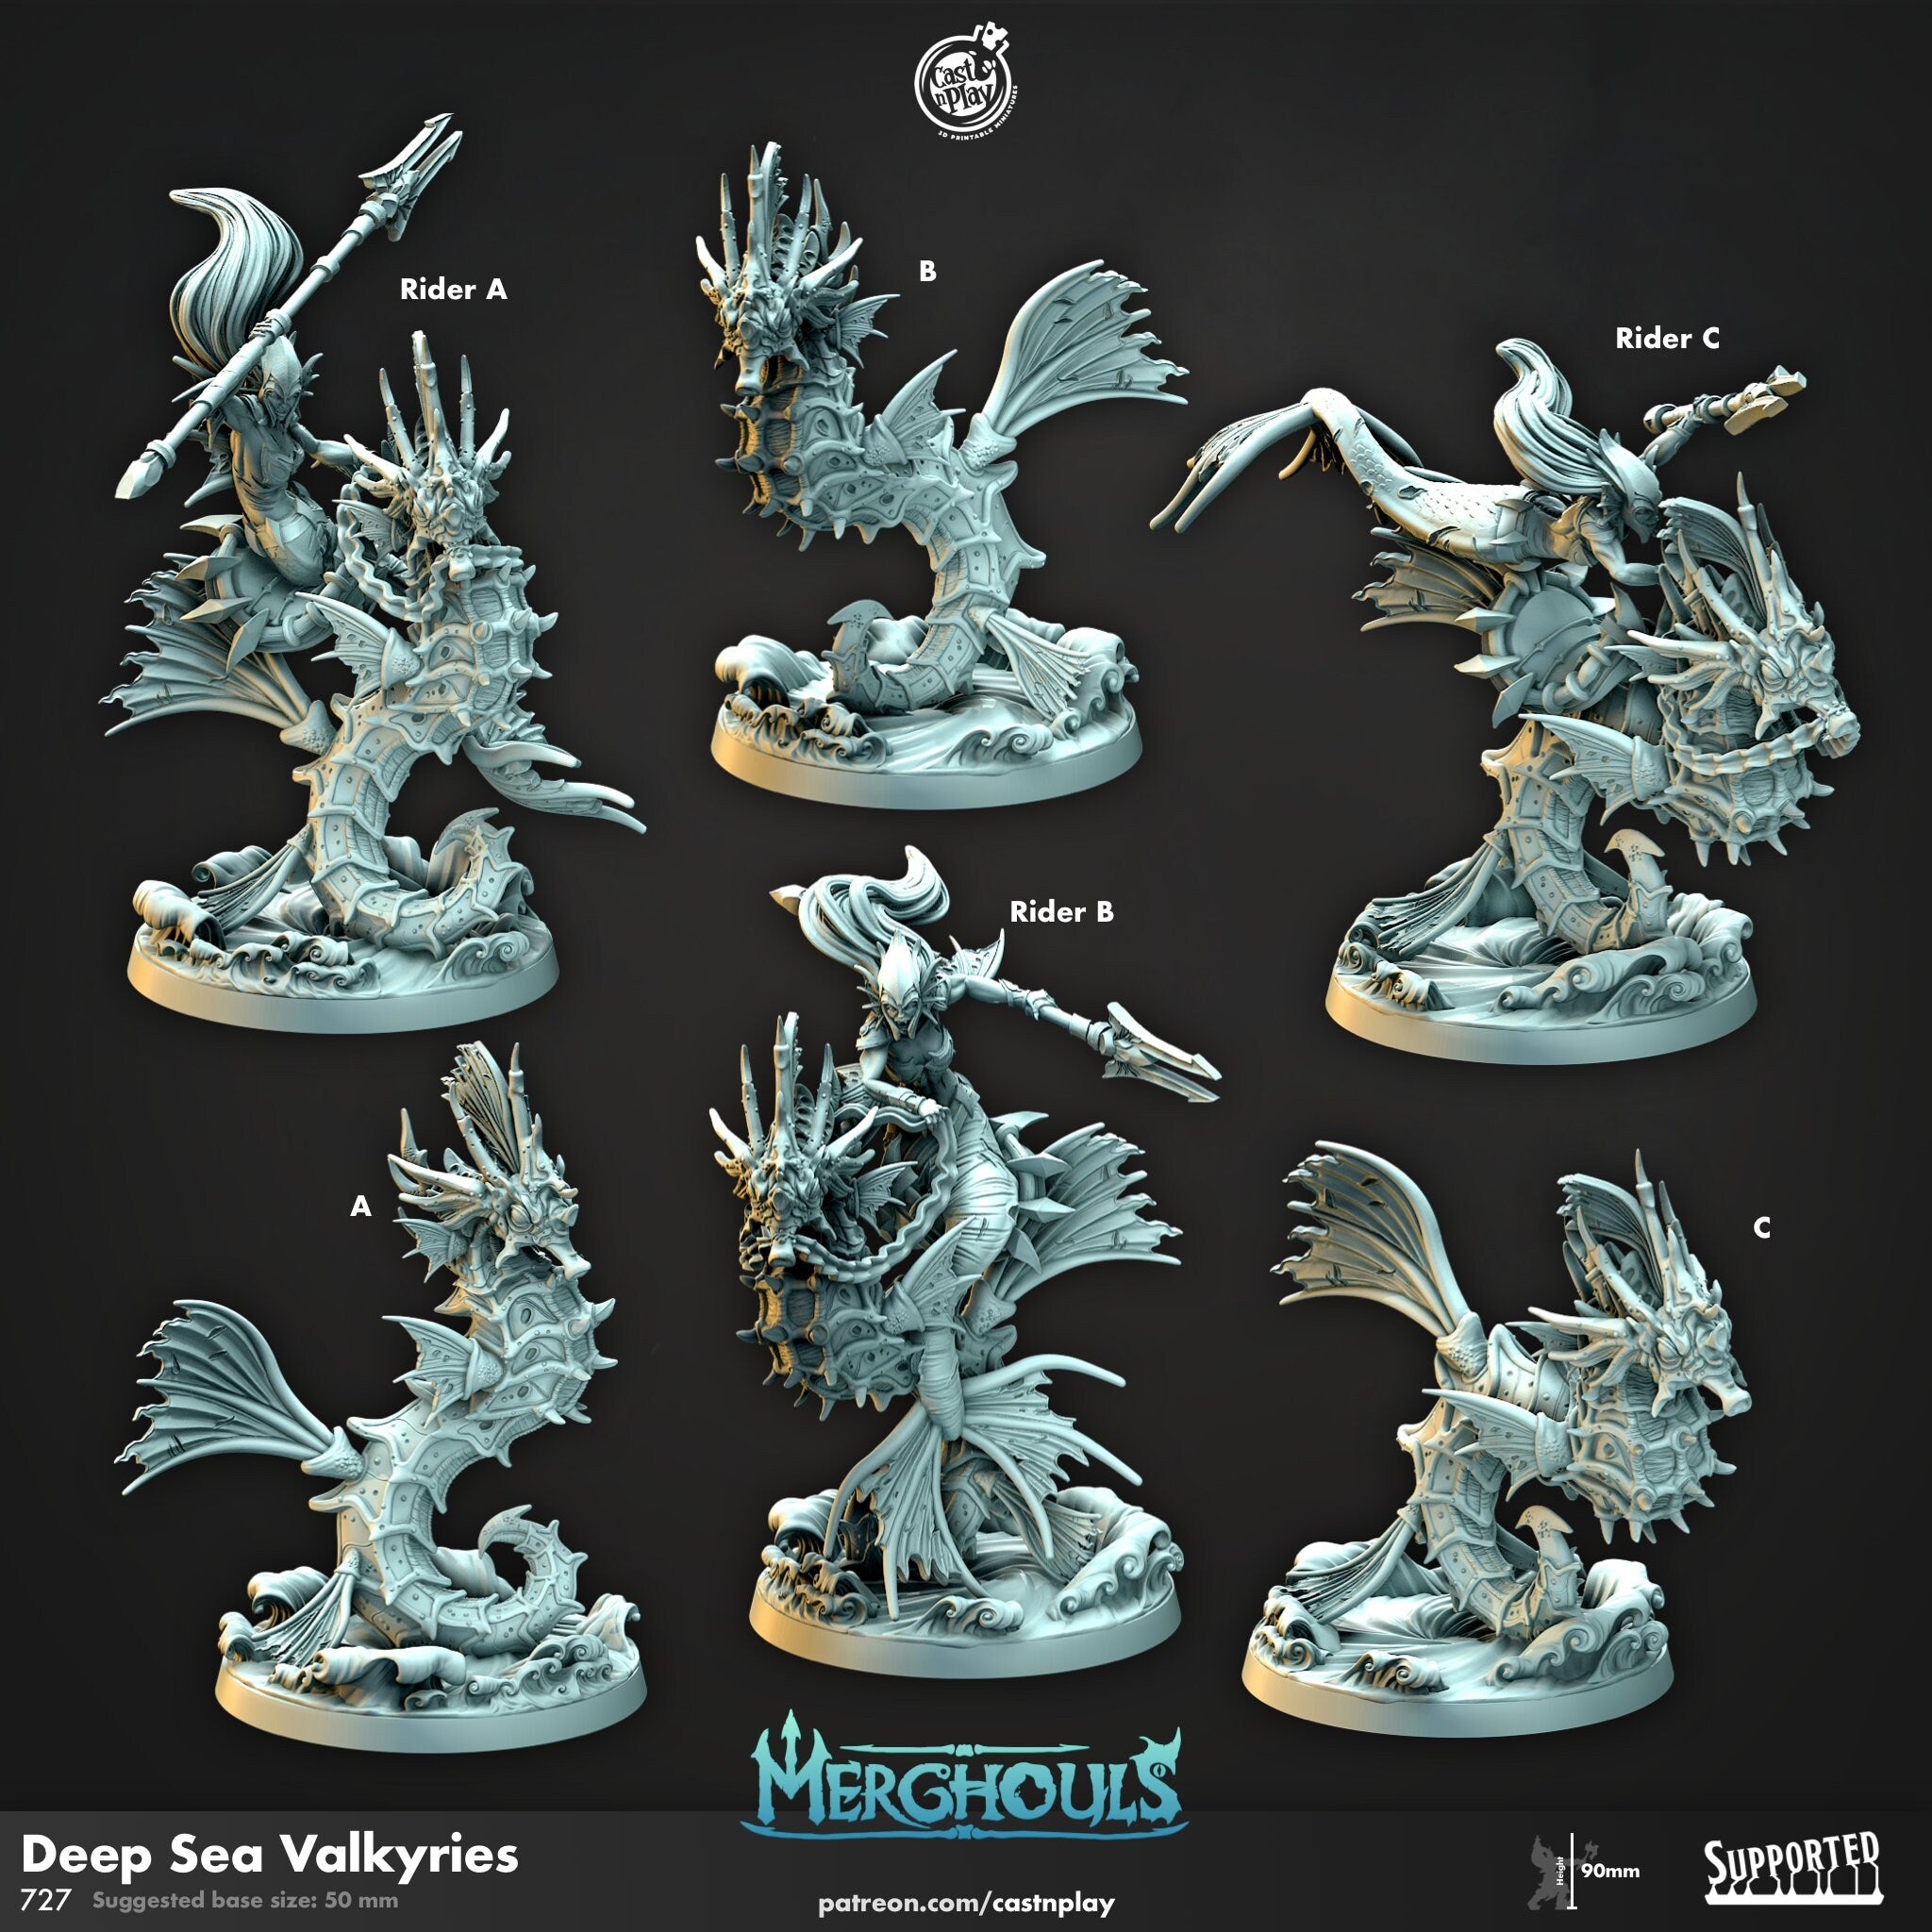 Siren Merghoul "Deep Sea Valkyries" 12K Print | DnD | Wargaming | Dungeons and Dragons | Pathfinder | Tabletop | RPG | 28-32 mm-Role Playing Miniatures